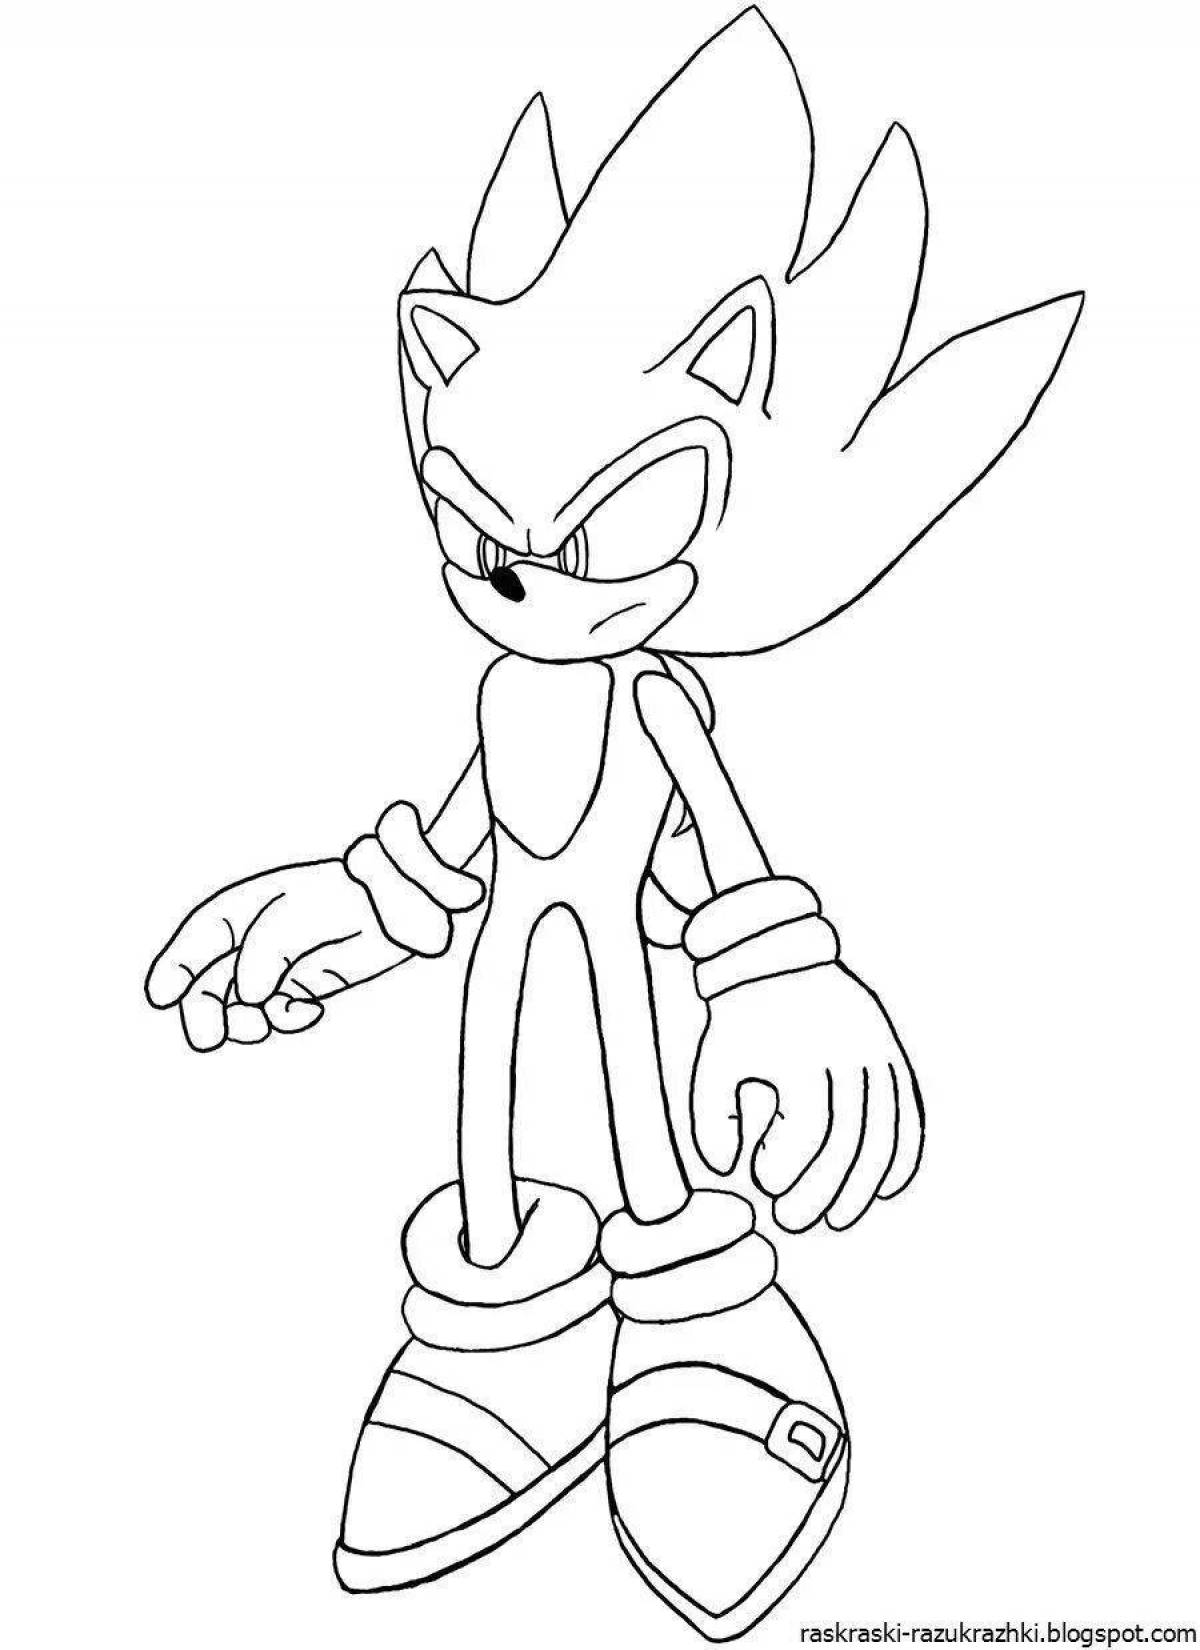 Coloring book dazzling baby sonic